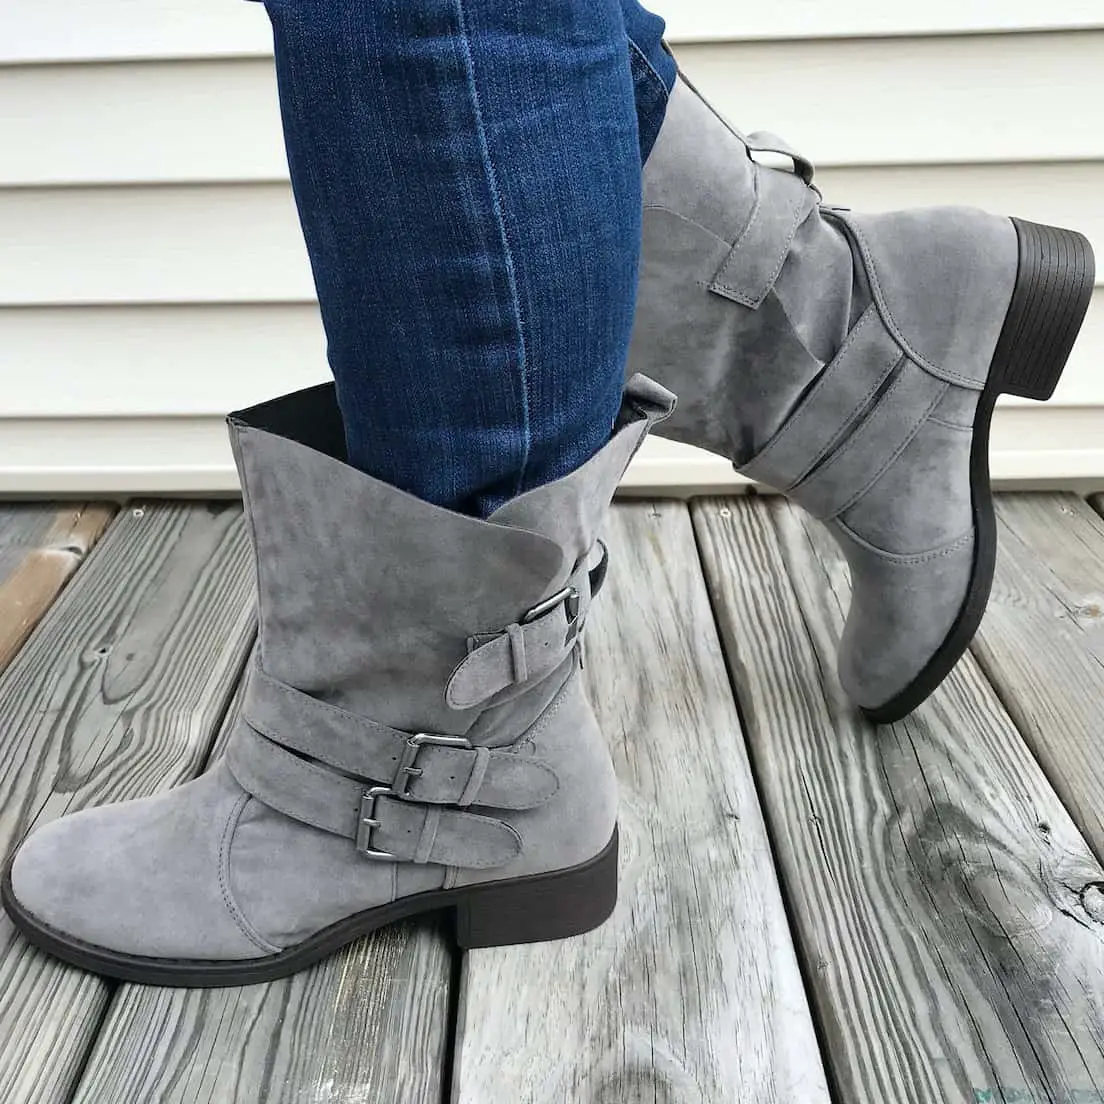 JustFab Sale: First Pair of Boots or Shoes only $10 with Free Shipping!